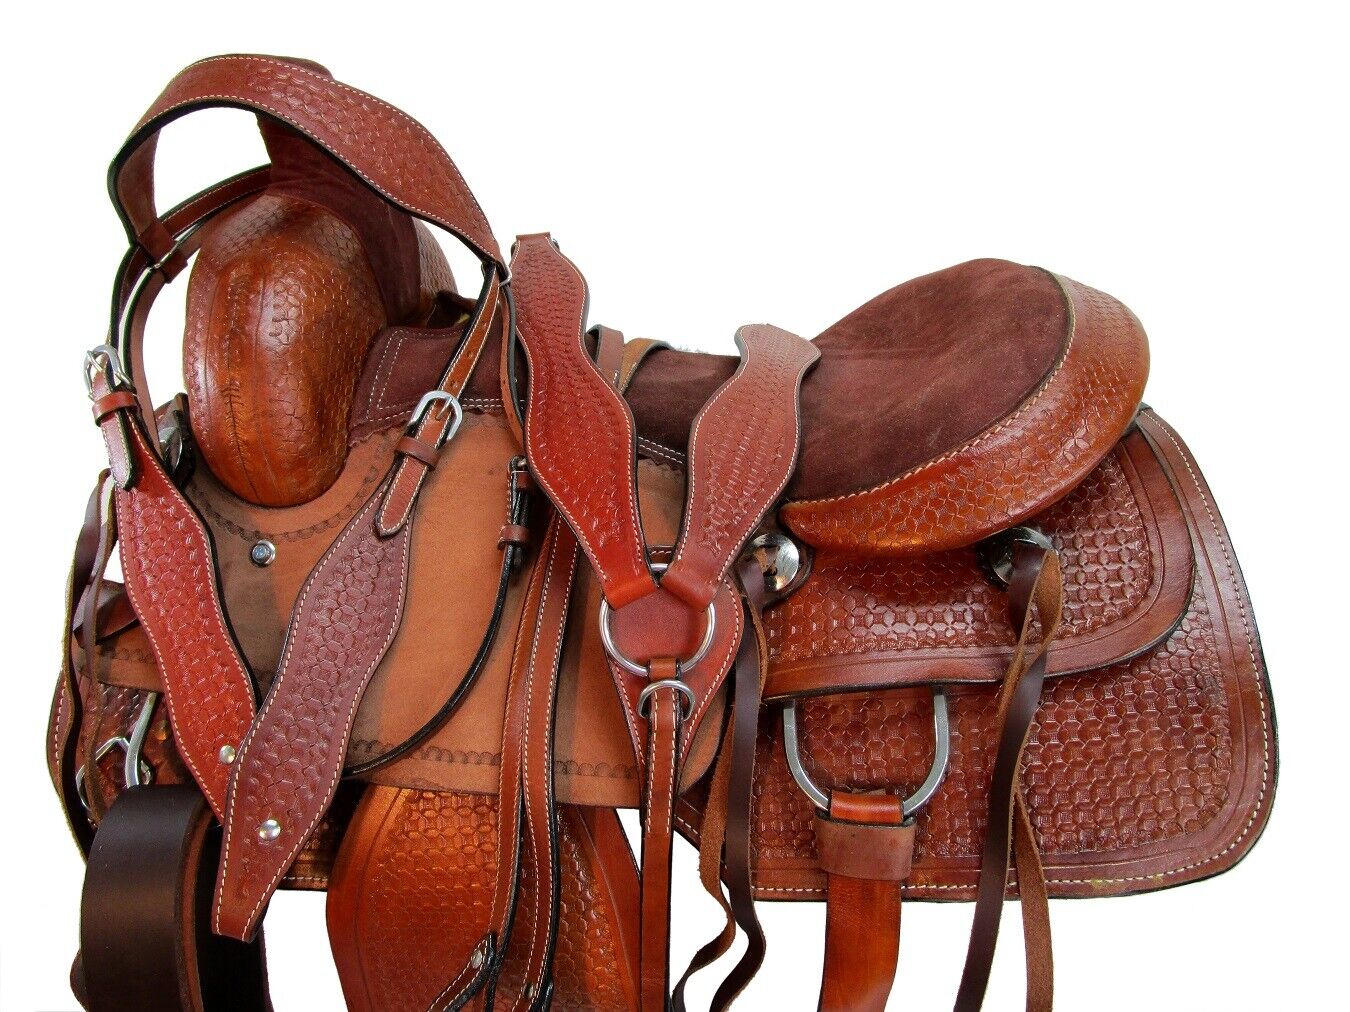 RODEO WESTERN RANCH SADDLE ROPING HORSE PLEASURE TOOLED LEATHER TACK 15 16 17